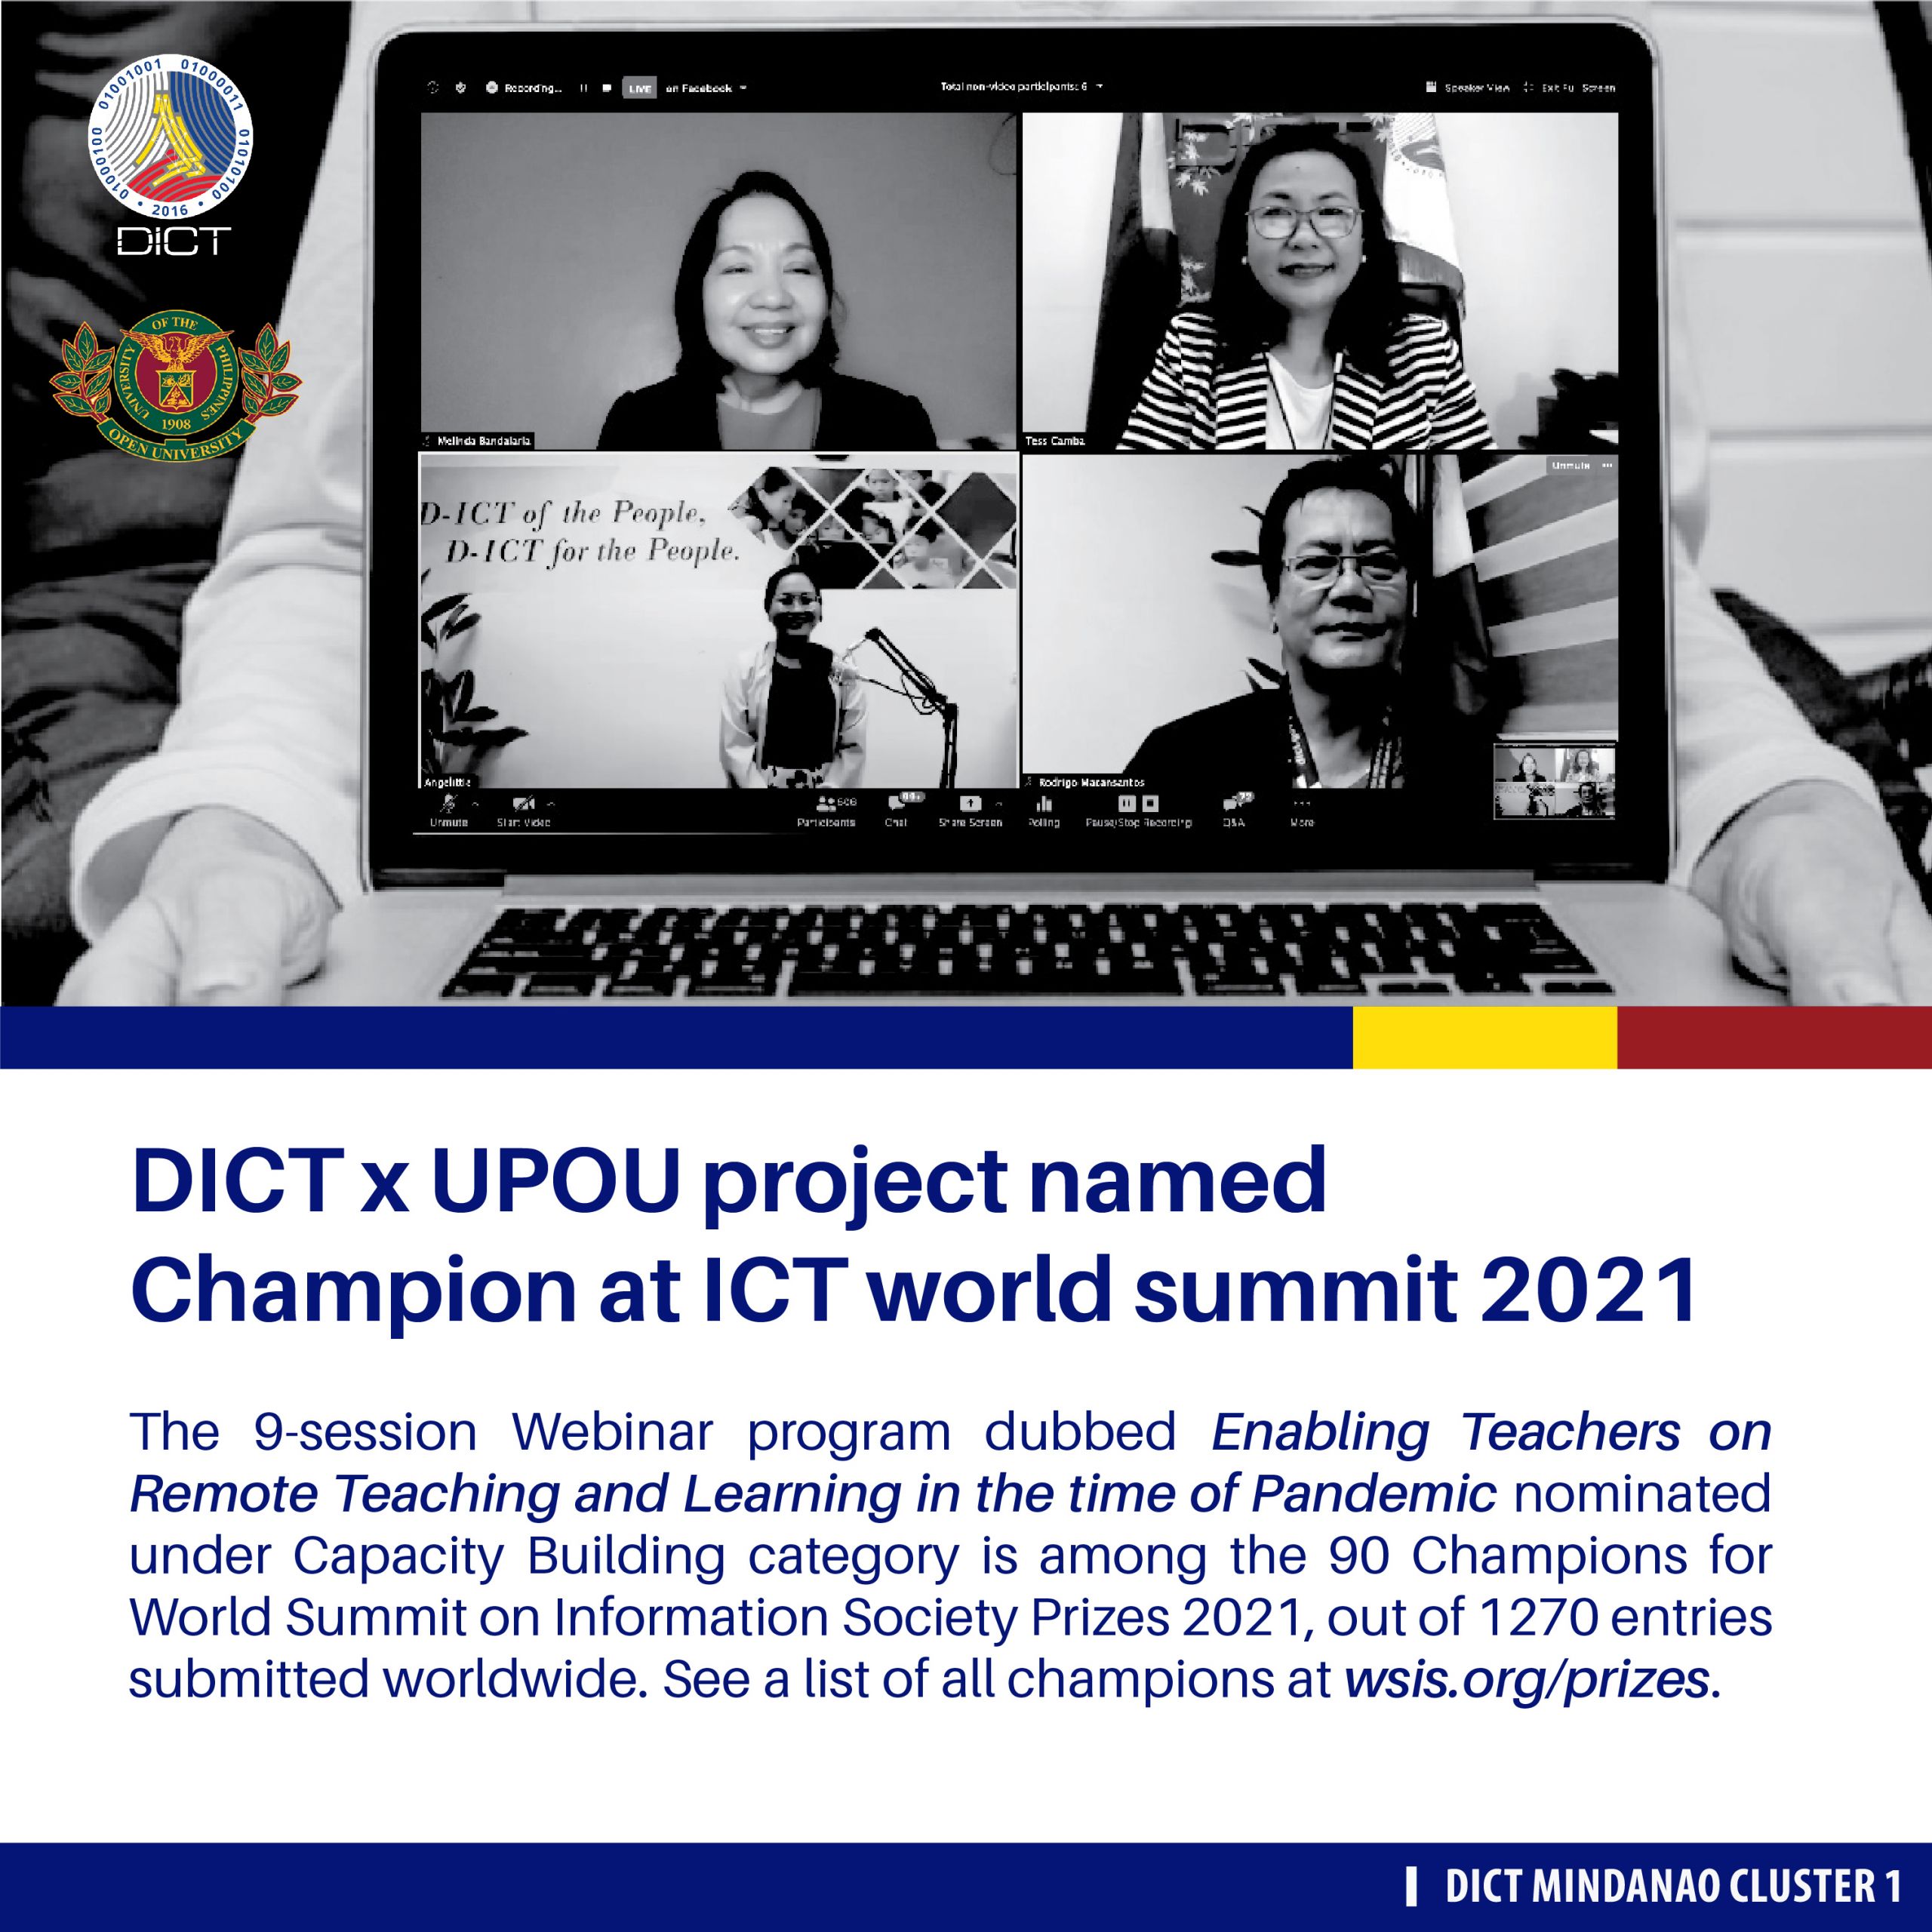 DICT x UPOU Project named Champion at ICT World Summit 2021